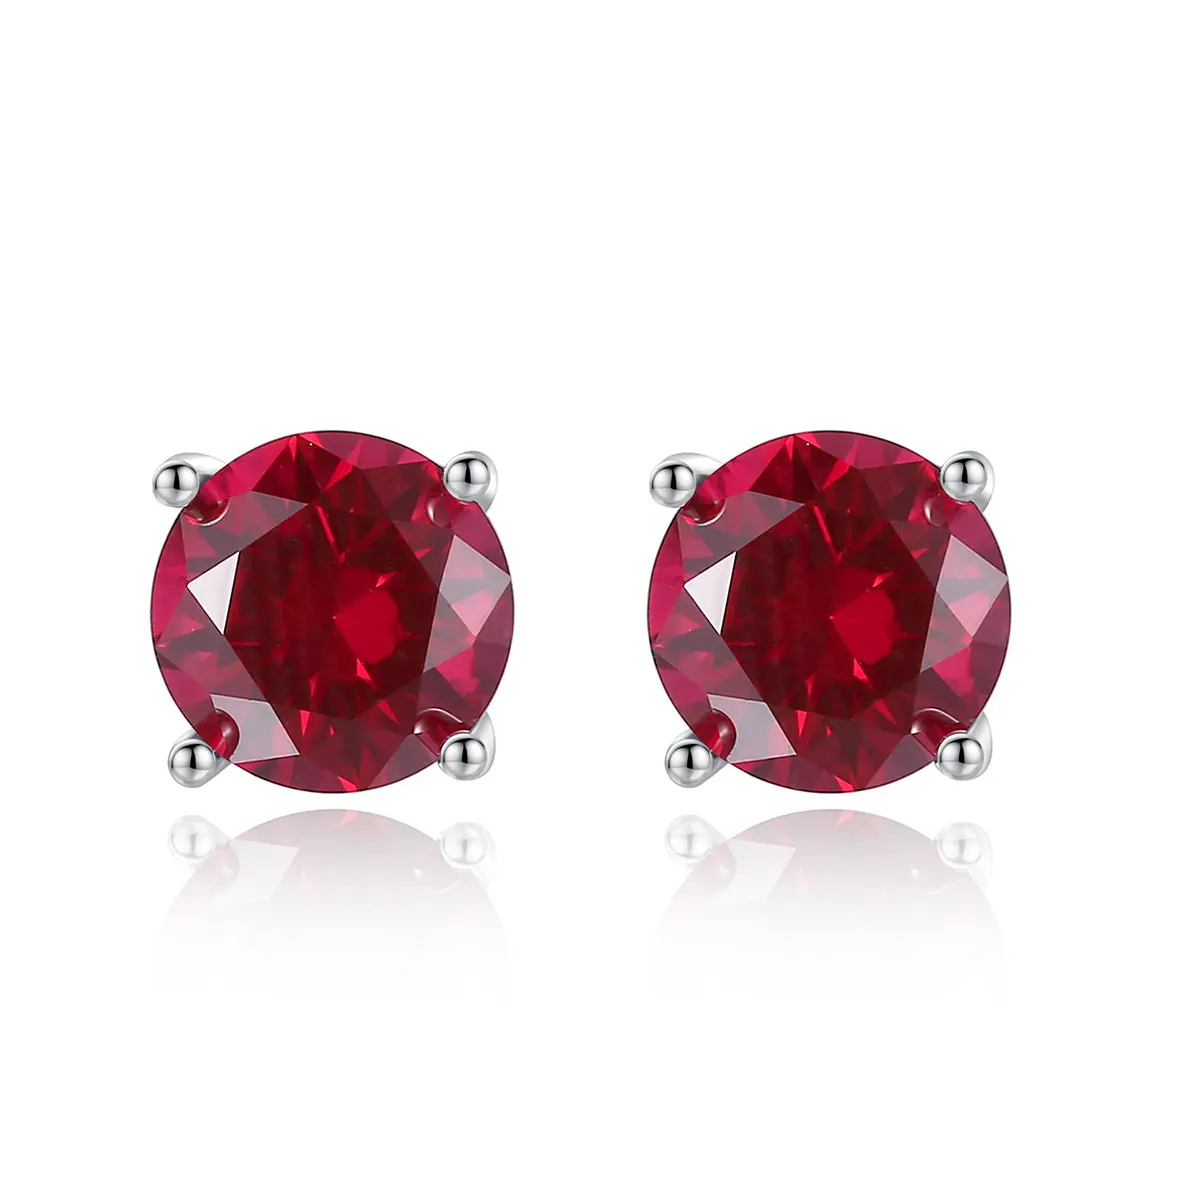 Simple Jewelry 925 Sterling Silver Cubic Zirconia Ruby Color Stud Earrings For Girls